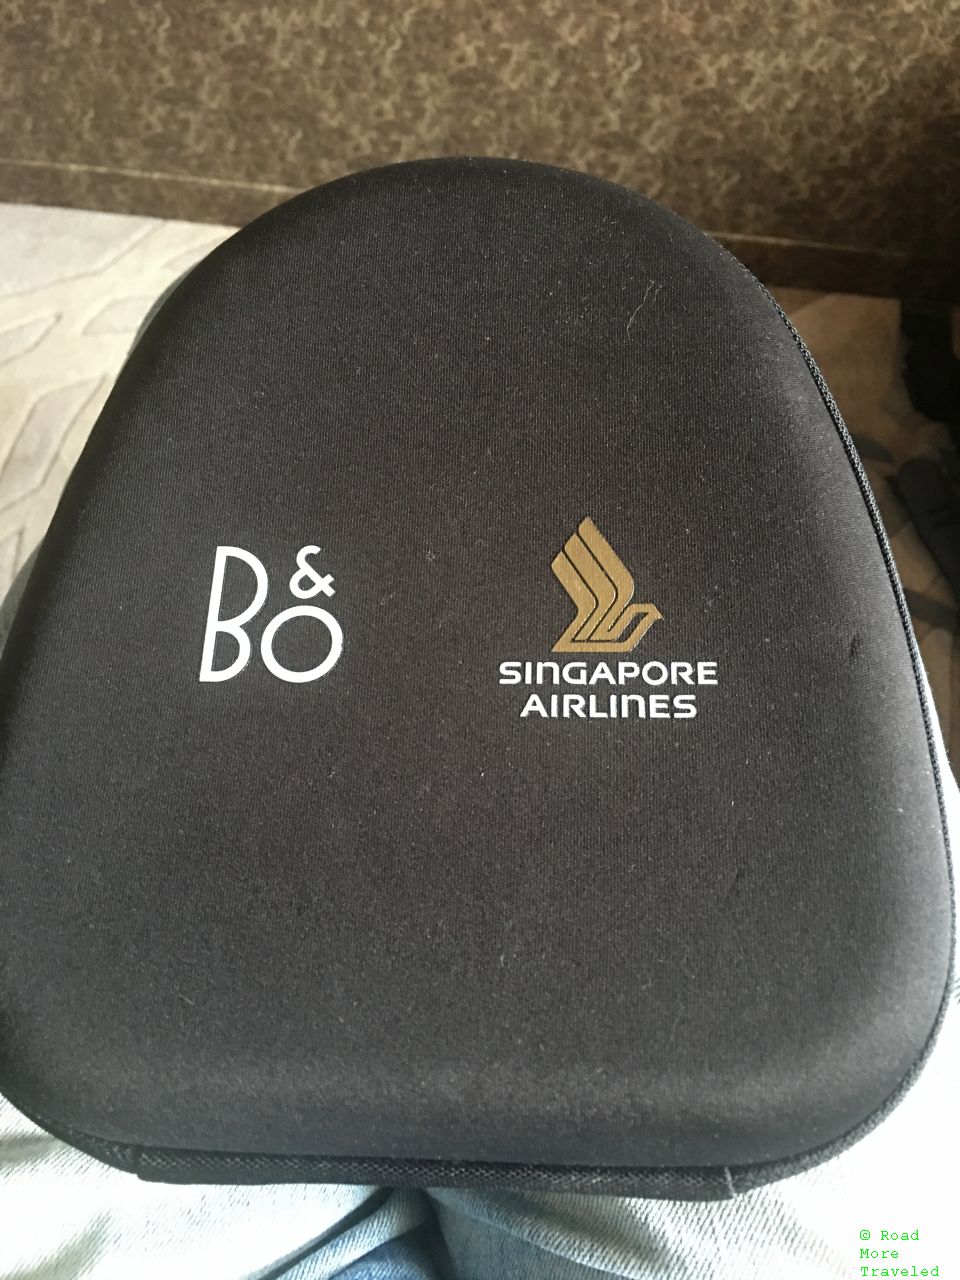 Singapore Airlines A380 Suites Class - B&O headphones